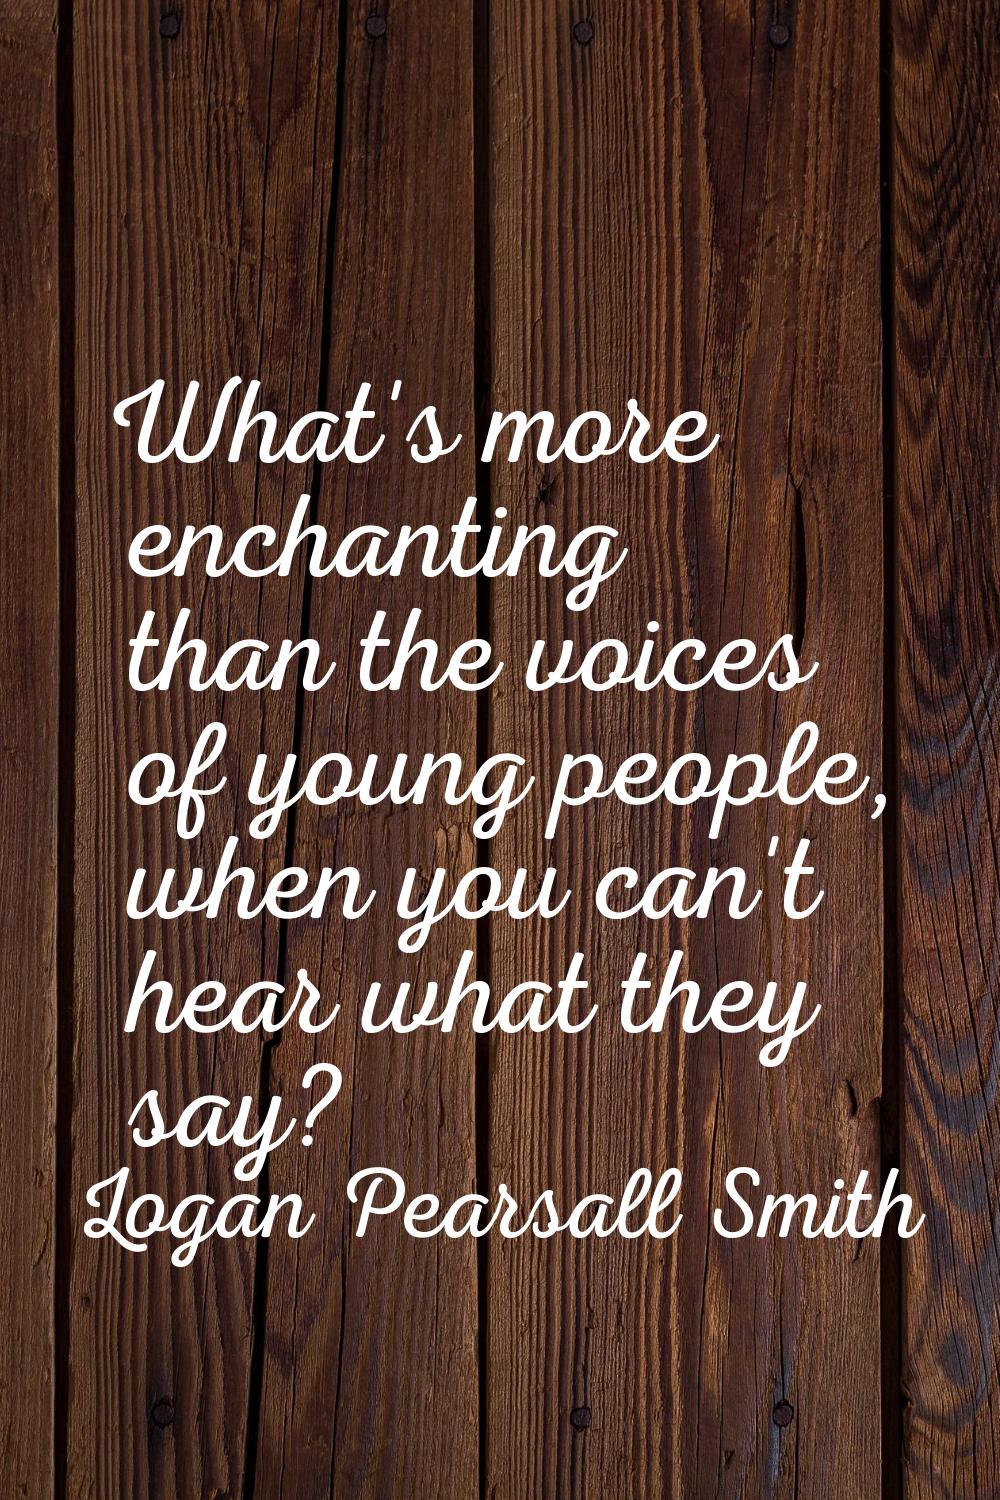 What's more enchanting than the voices of young people, when you can't hear what they say?